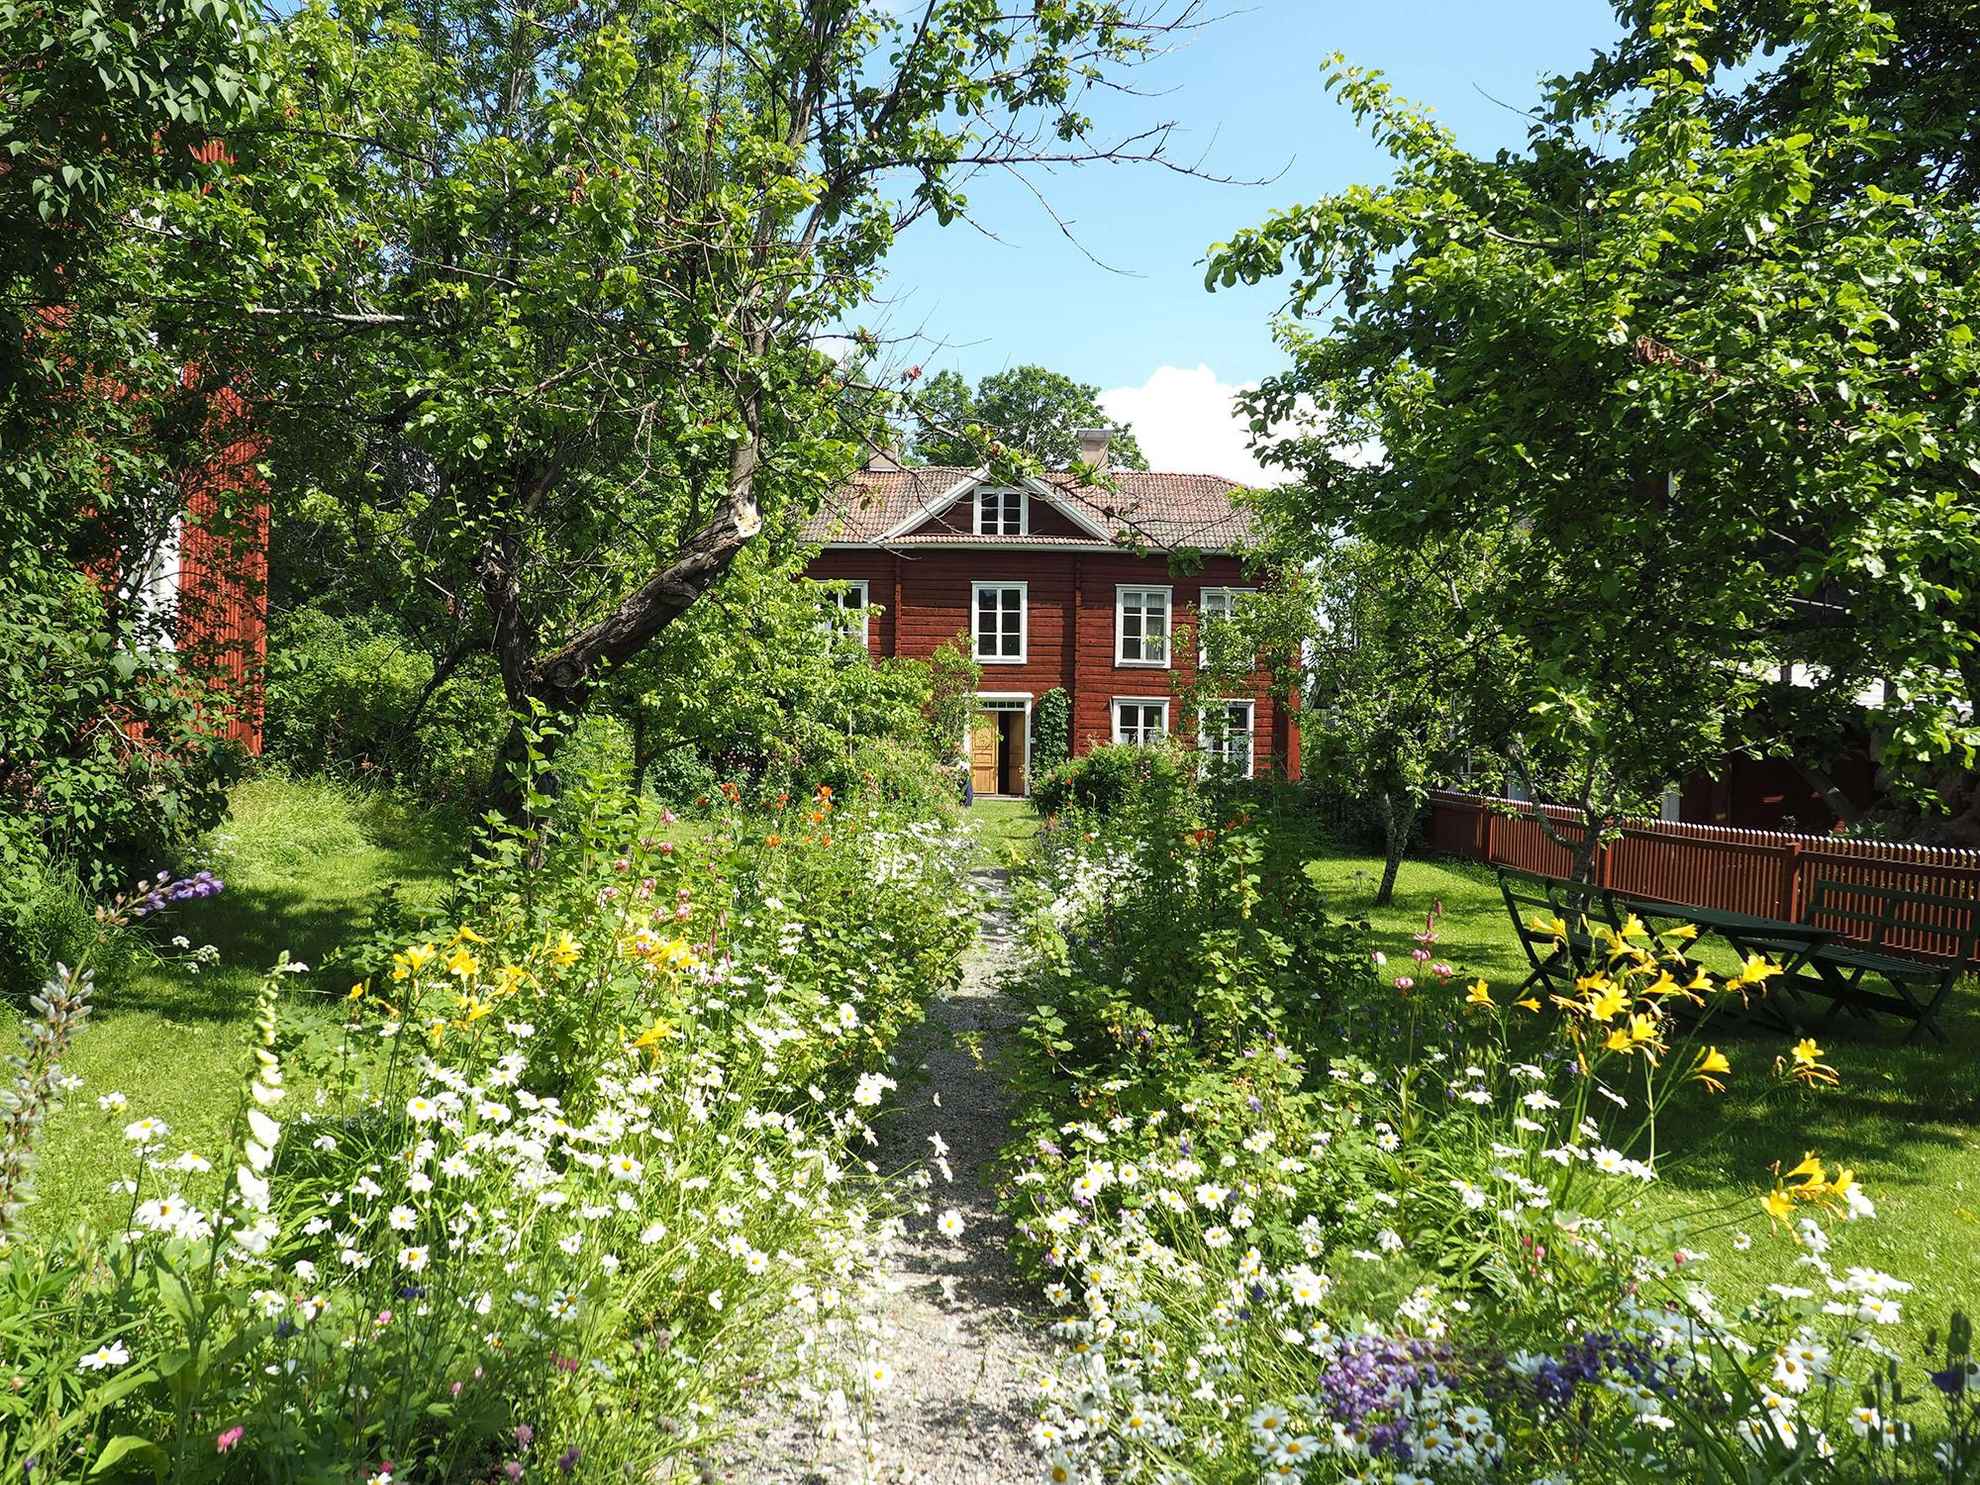 A gravel road with blooming flowers on each side leads up to a red wooden house. There is outdoor furniture and trees on the green lawn.